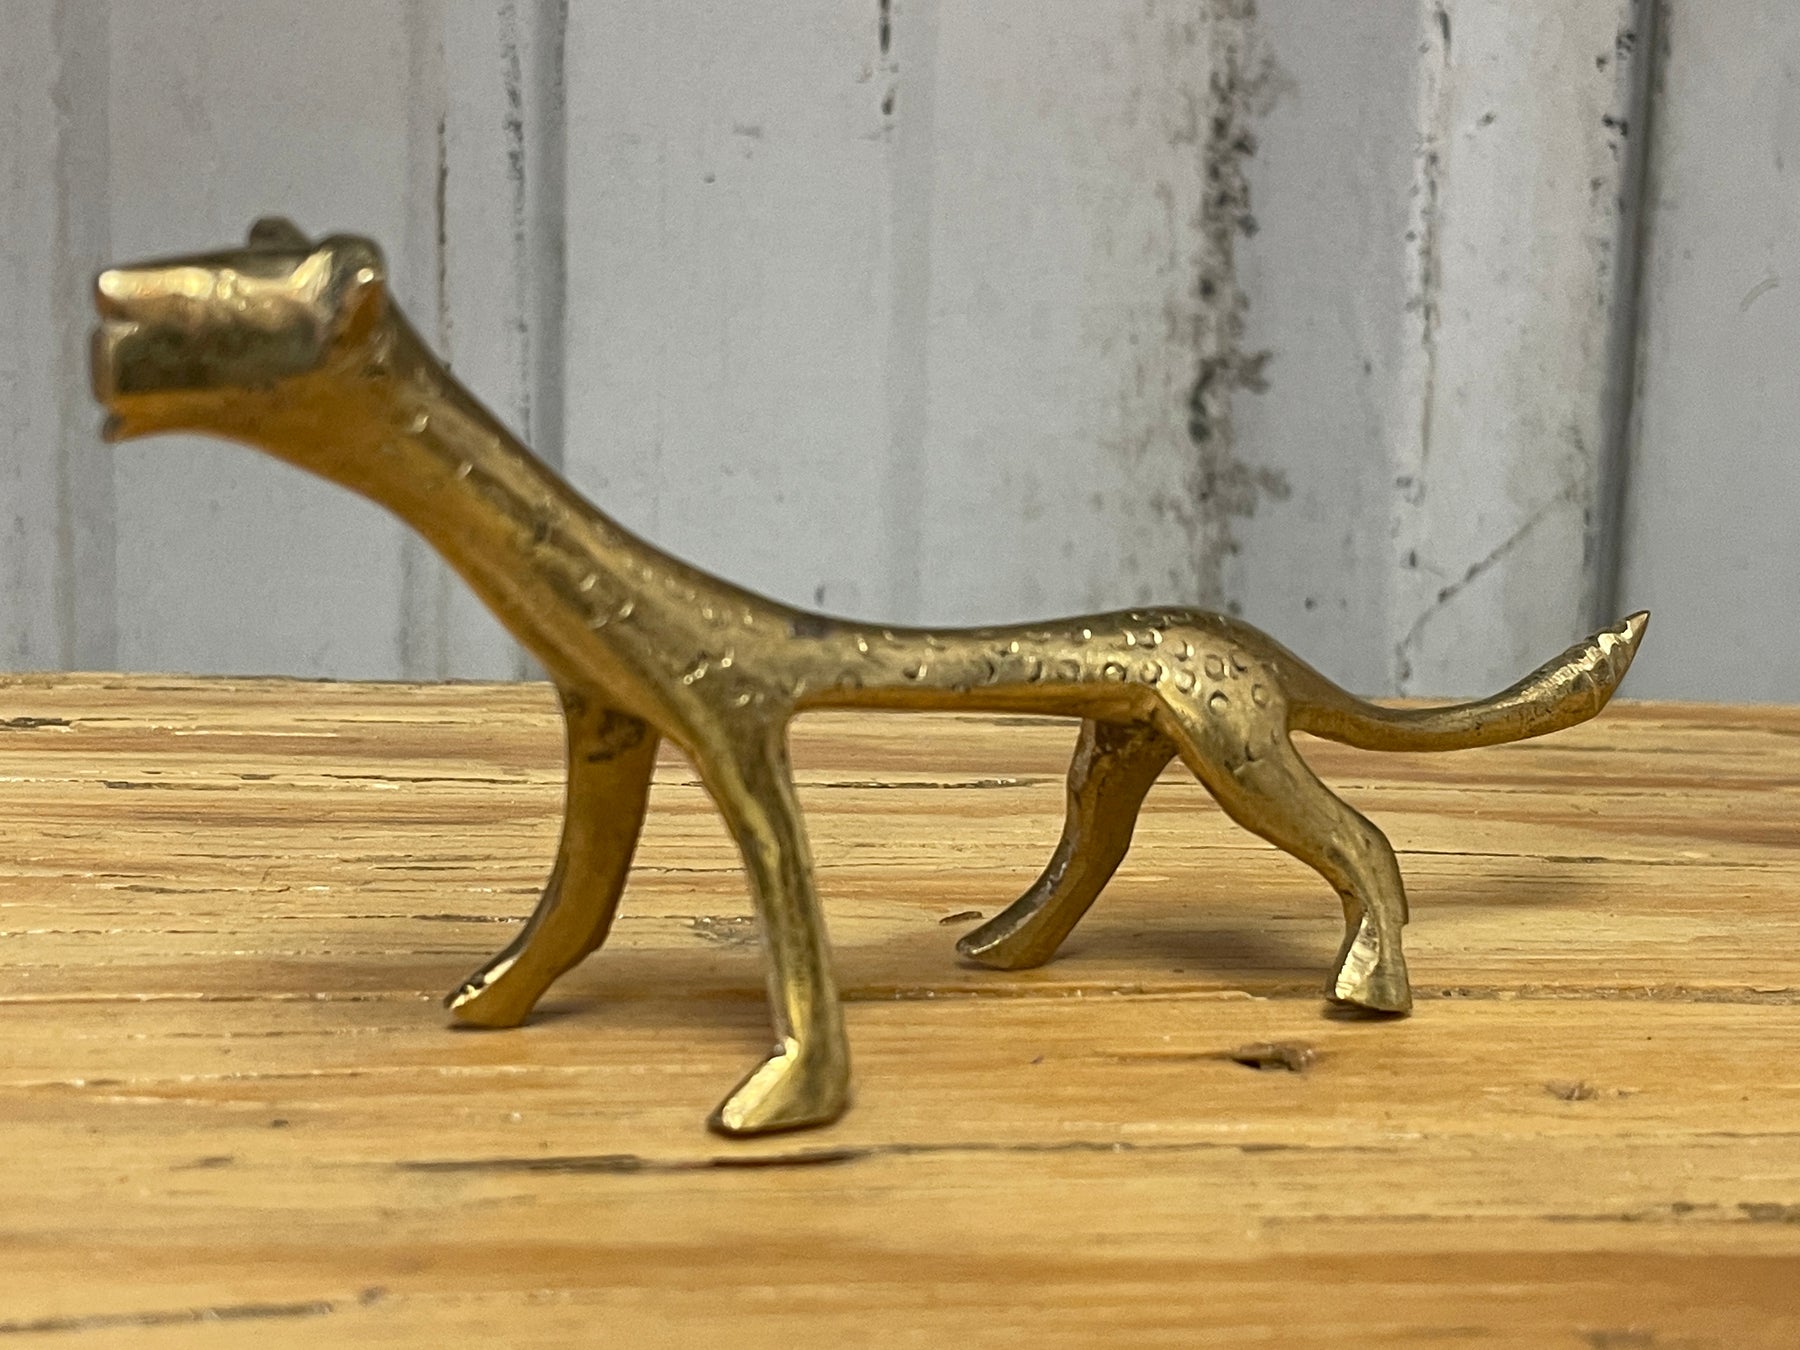 Brass cheetah – Shop with a Mission